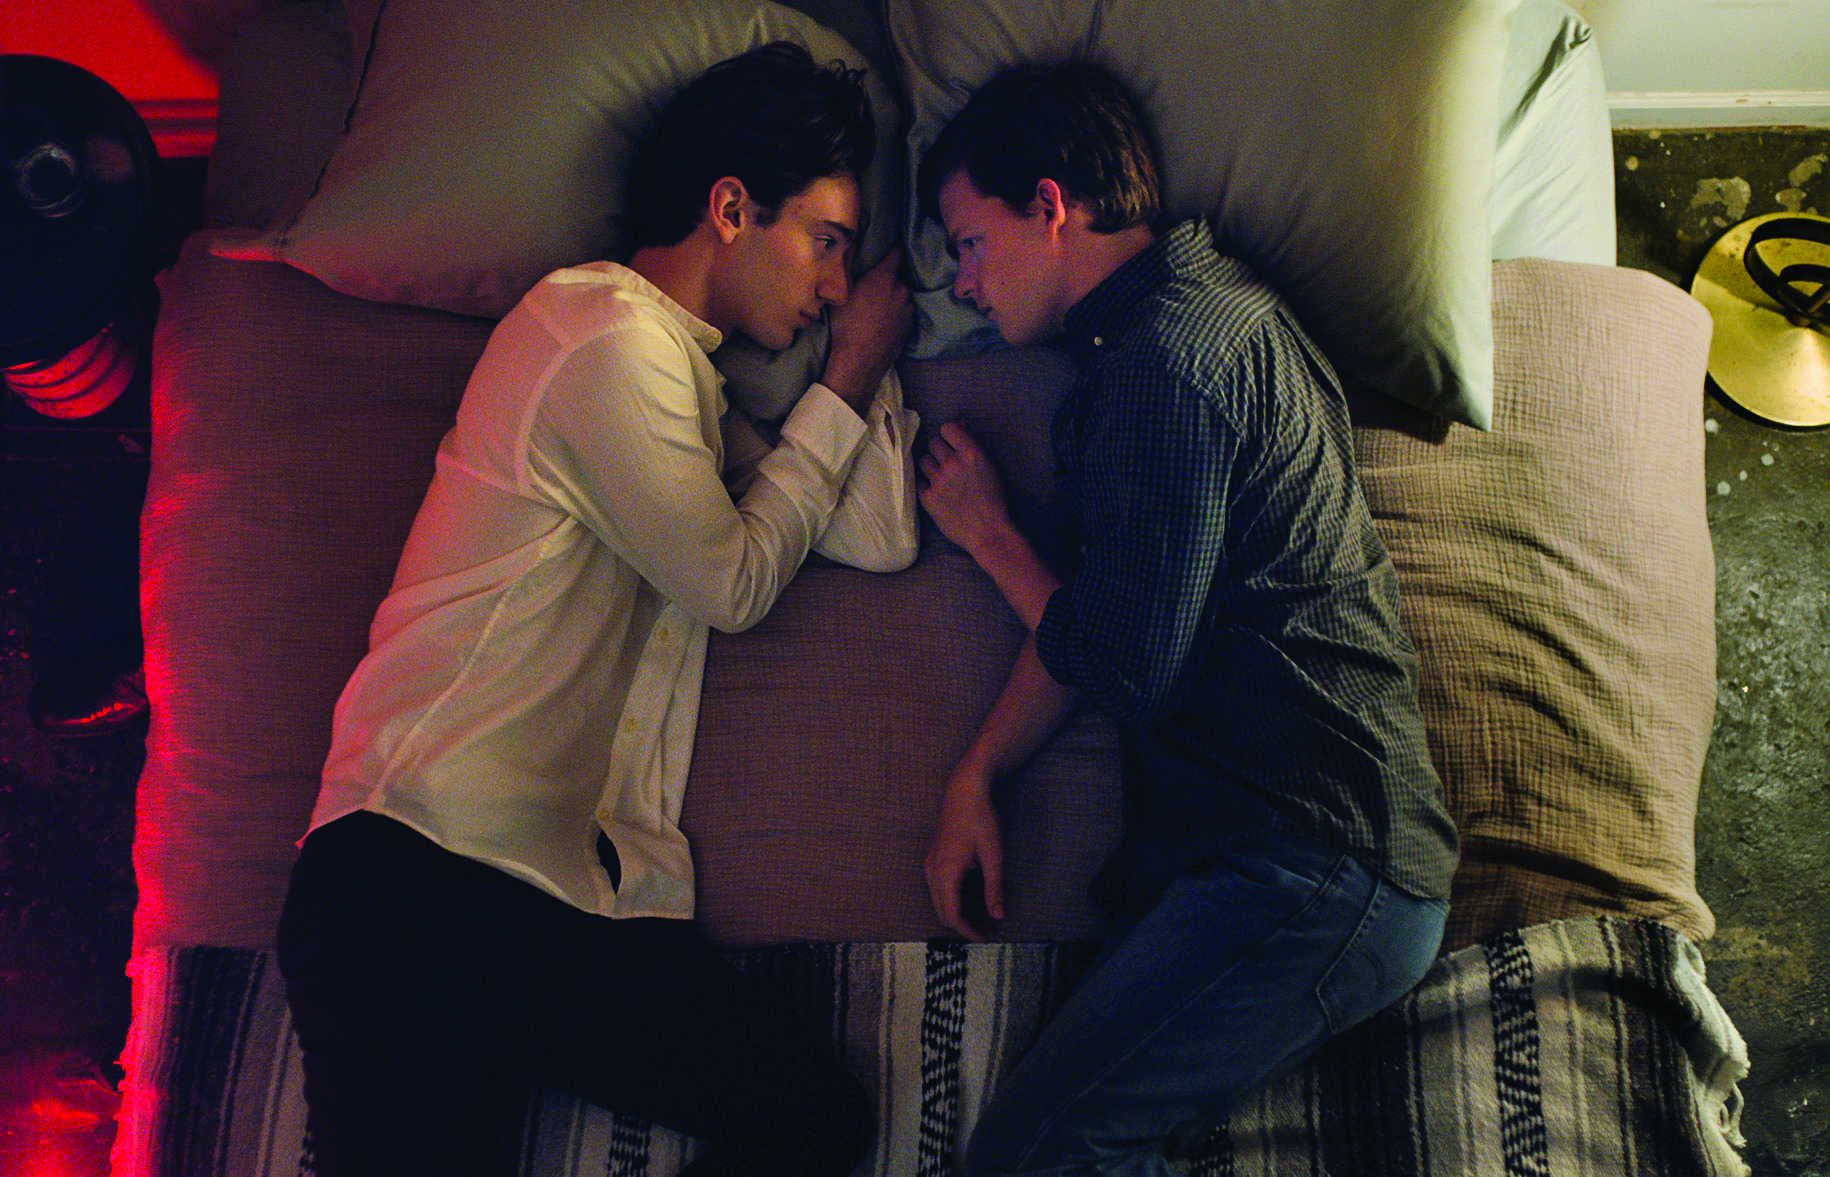 Review: “Boy Erased” reveals truths and horrors about conversion therapy in America